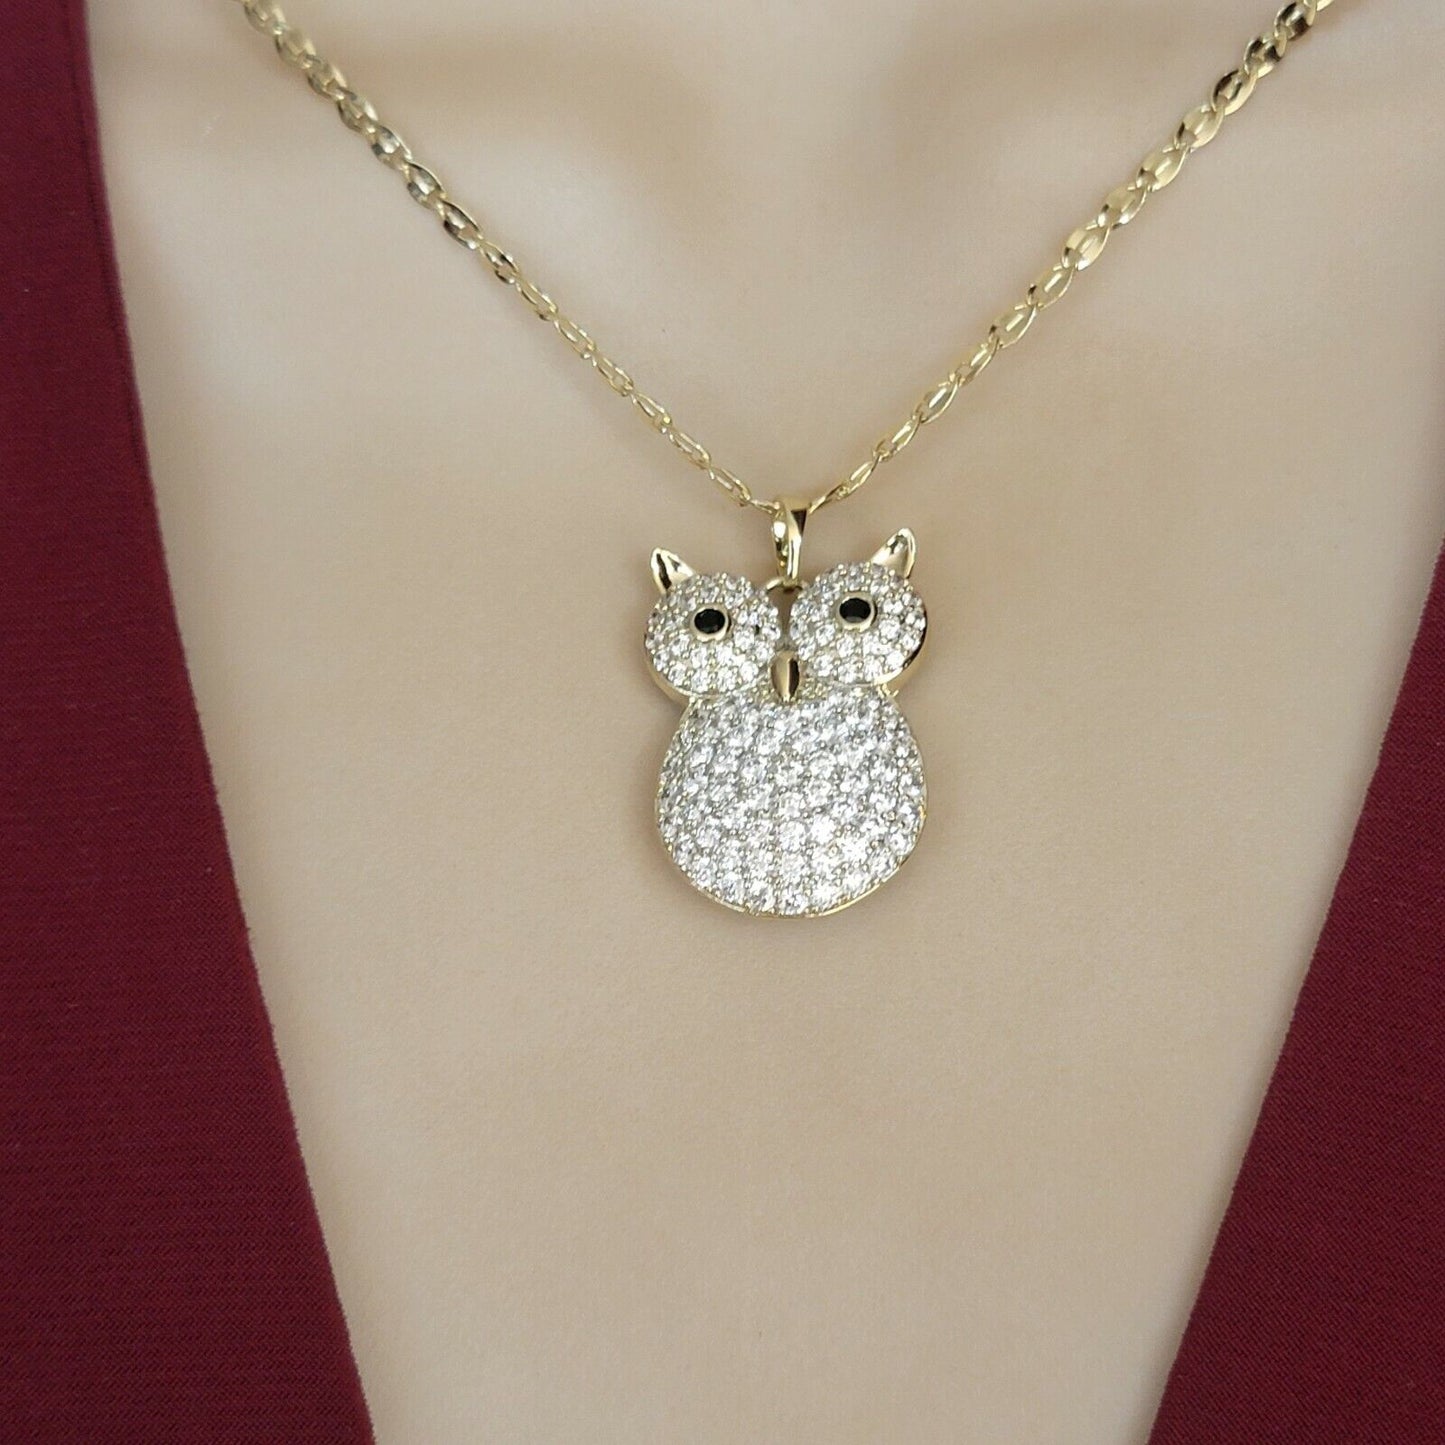 Necklaces - 14k Gold Plated. CZ Icy Owl Pendant & Chain.